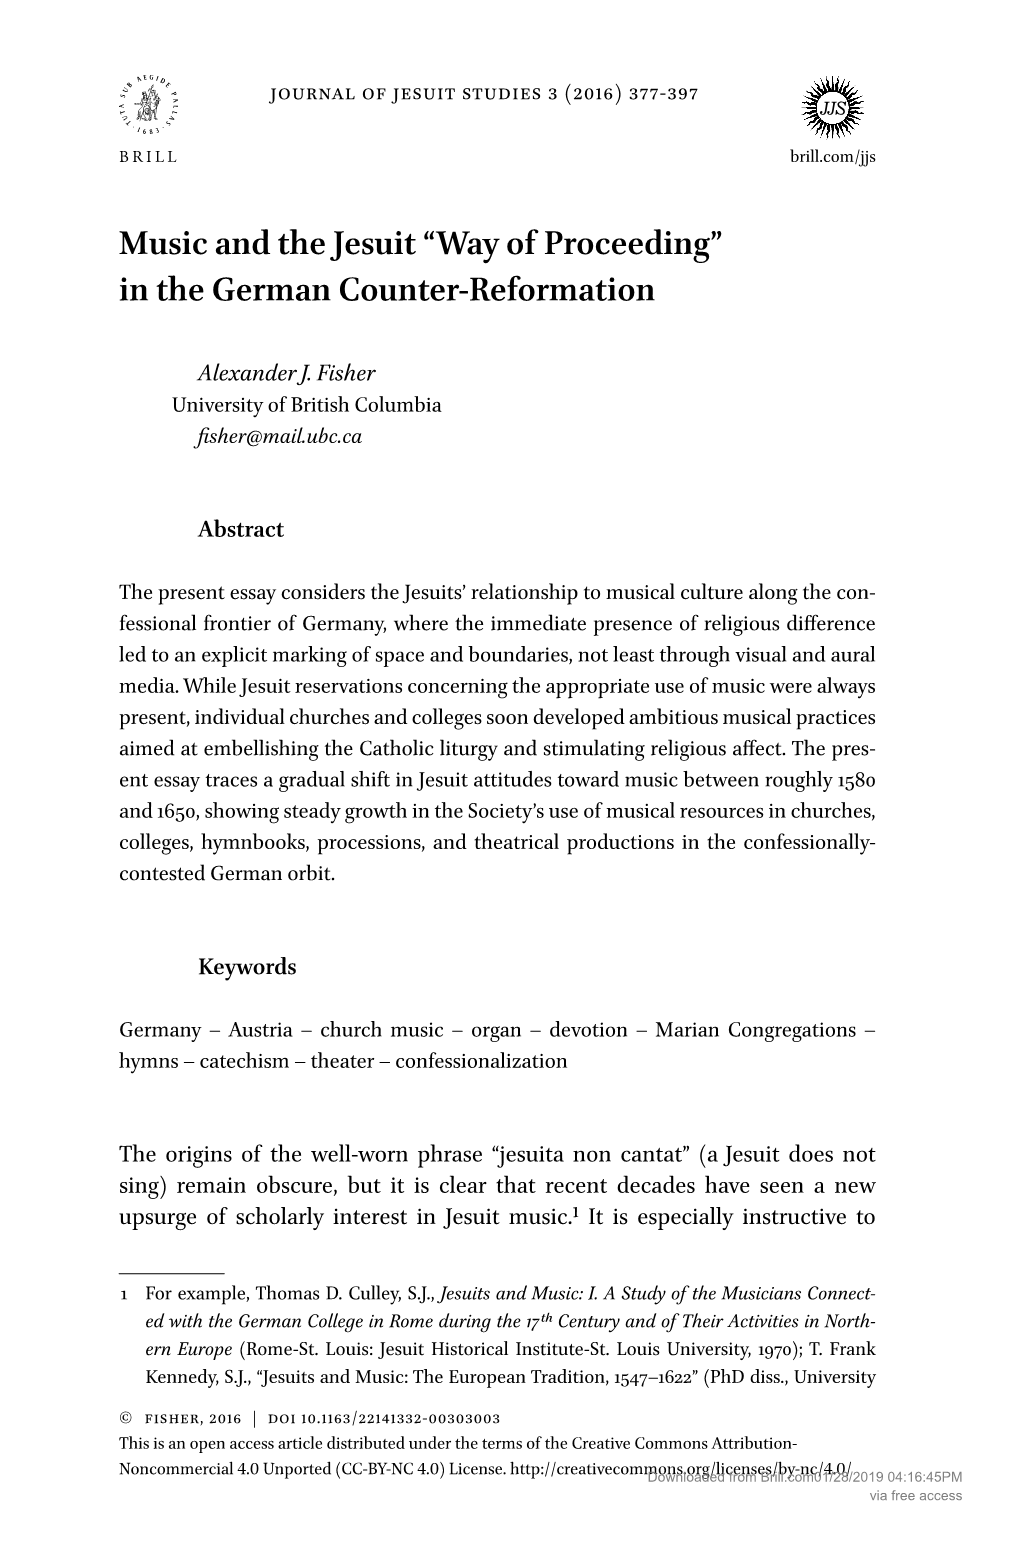 Music and the Jesuit “Way of Proceeding” in the German Counter-Reformation